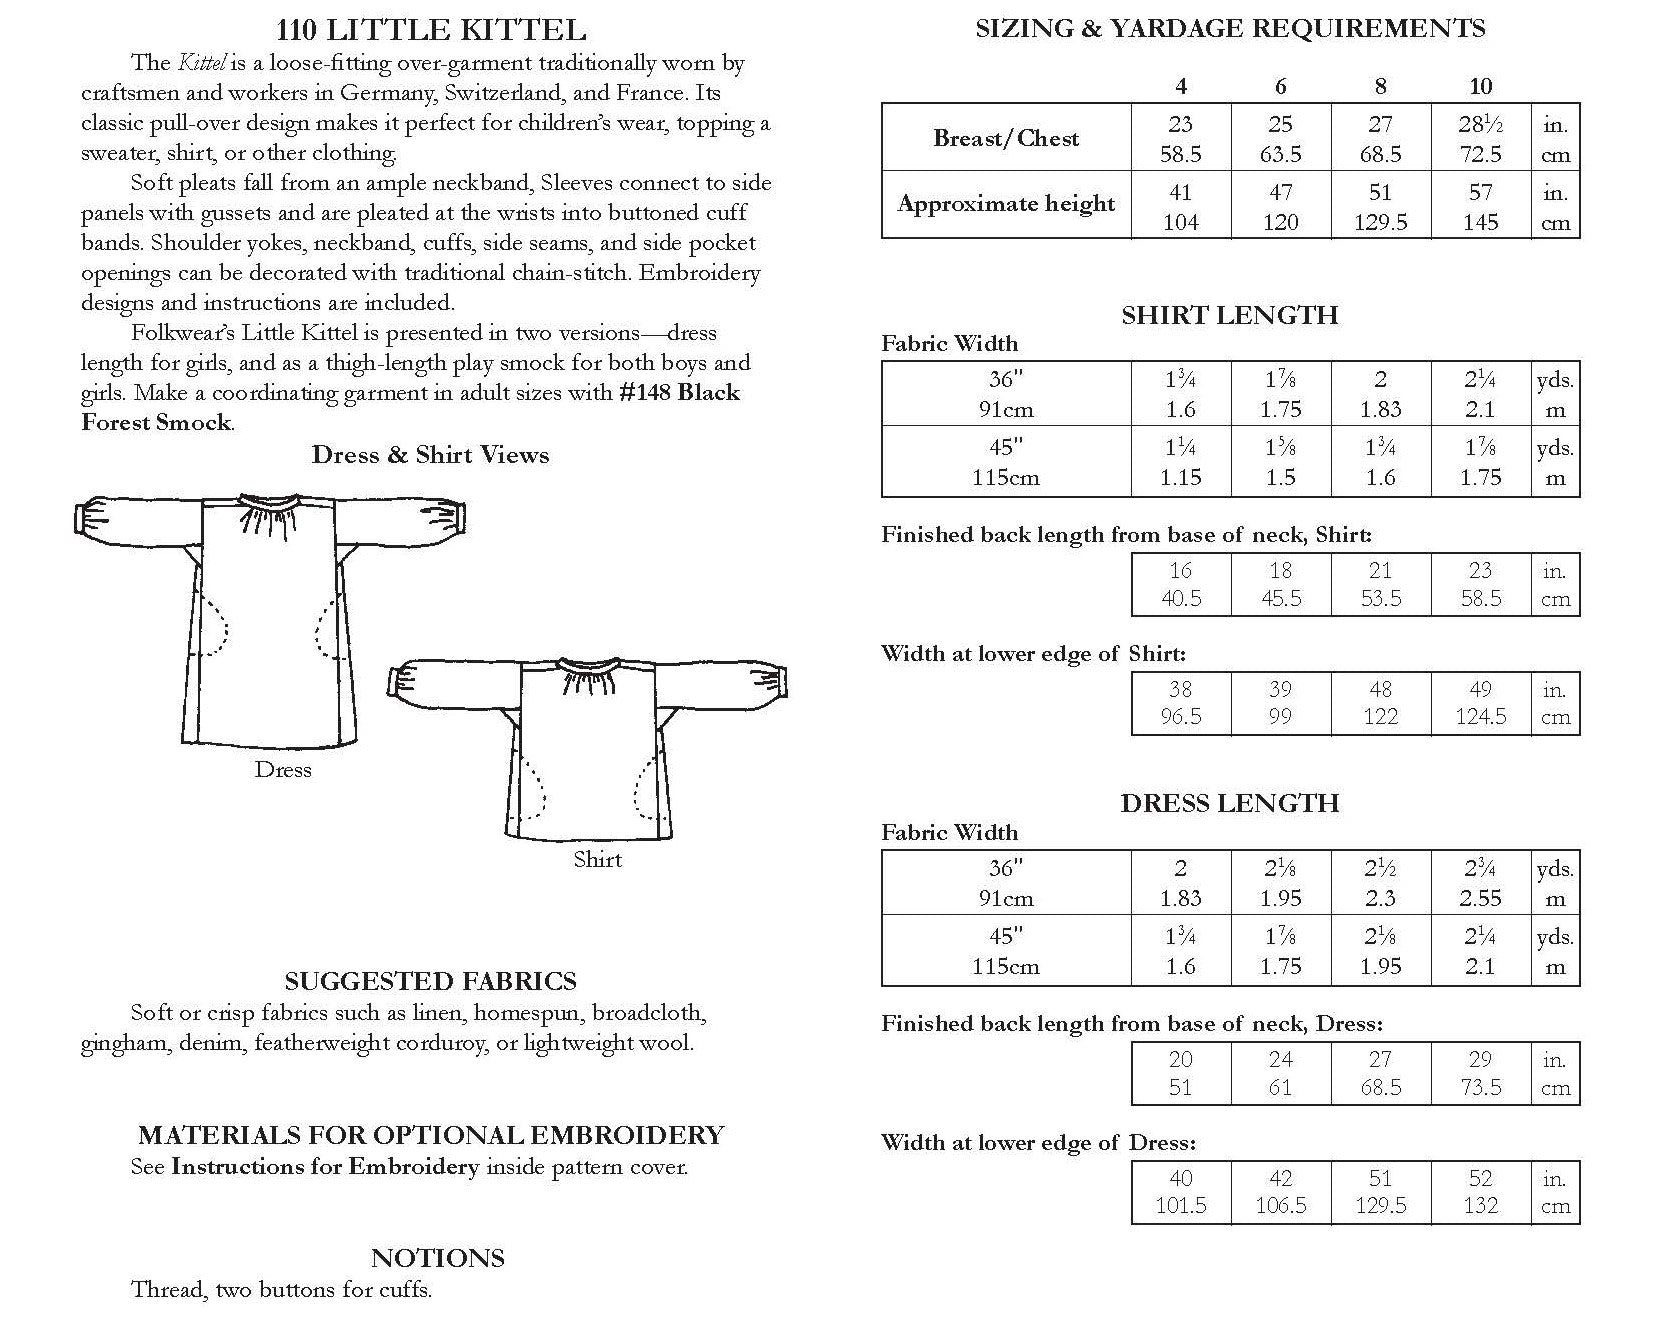 Photo of back cover for 110 Little Kittle pattern.  Shows size charts and descriptions as well as fabric suggestions.